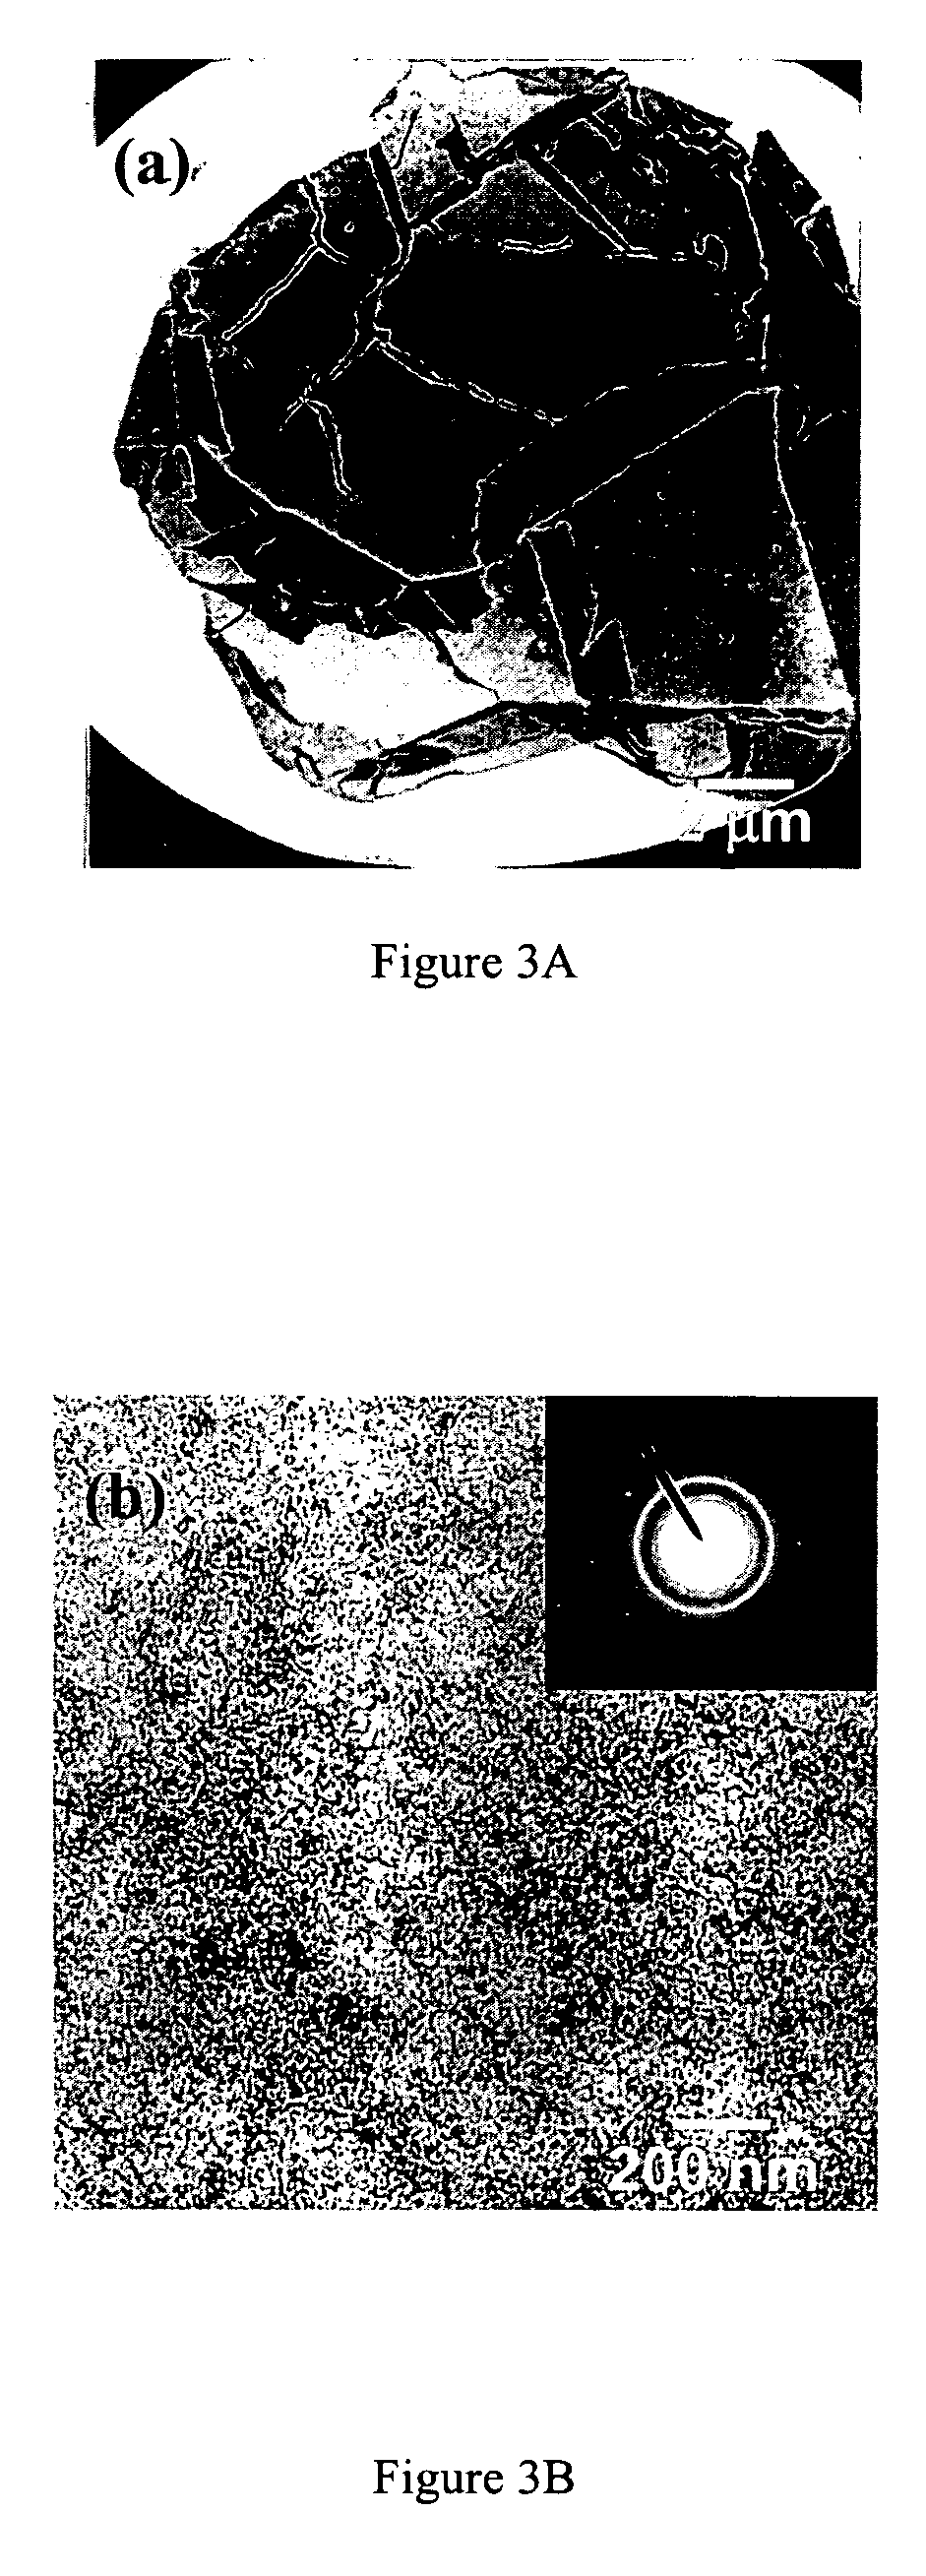 PEG-substituted pyridine ligands and related water-soluble catalysts